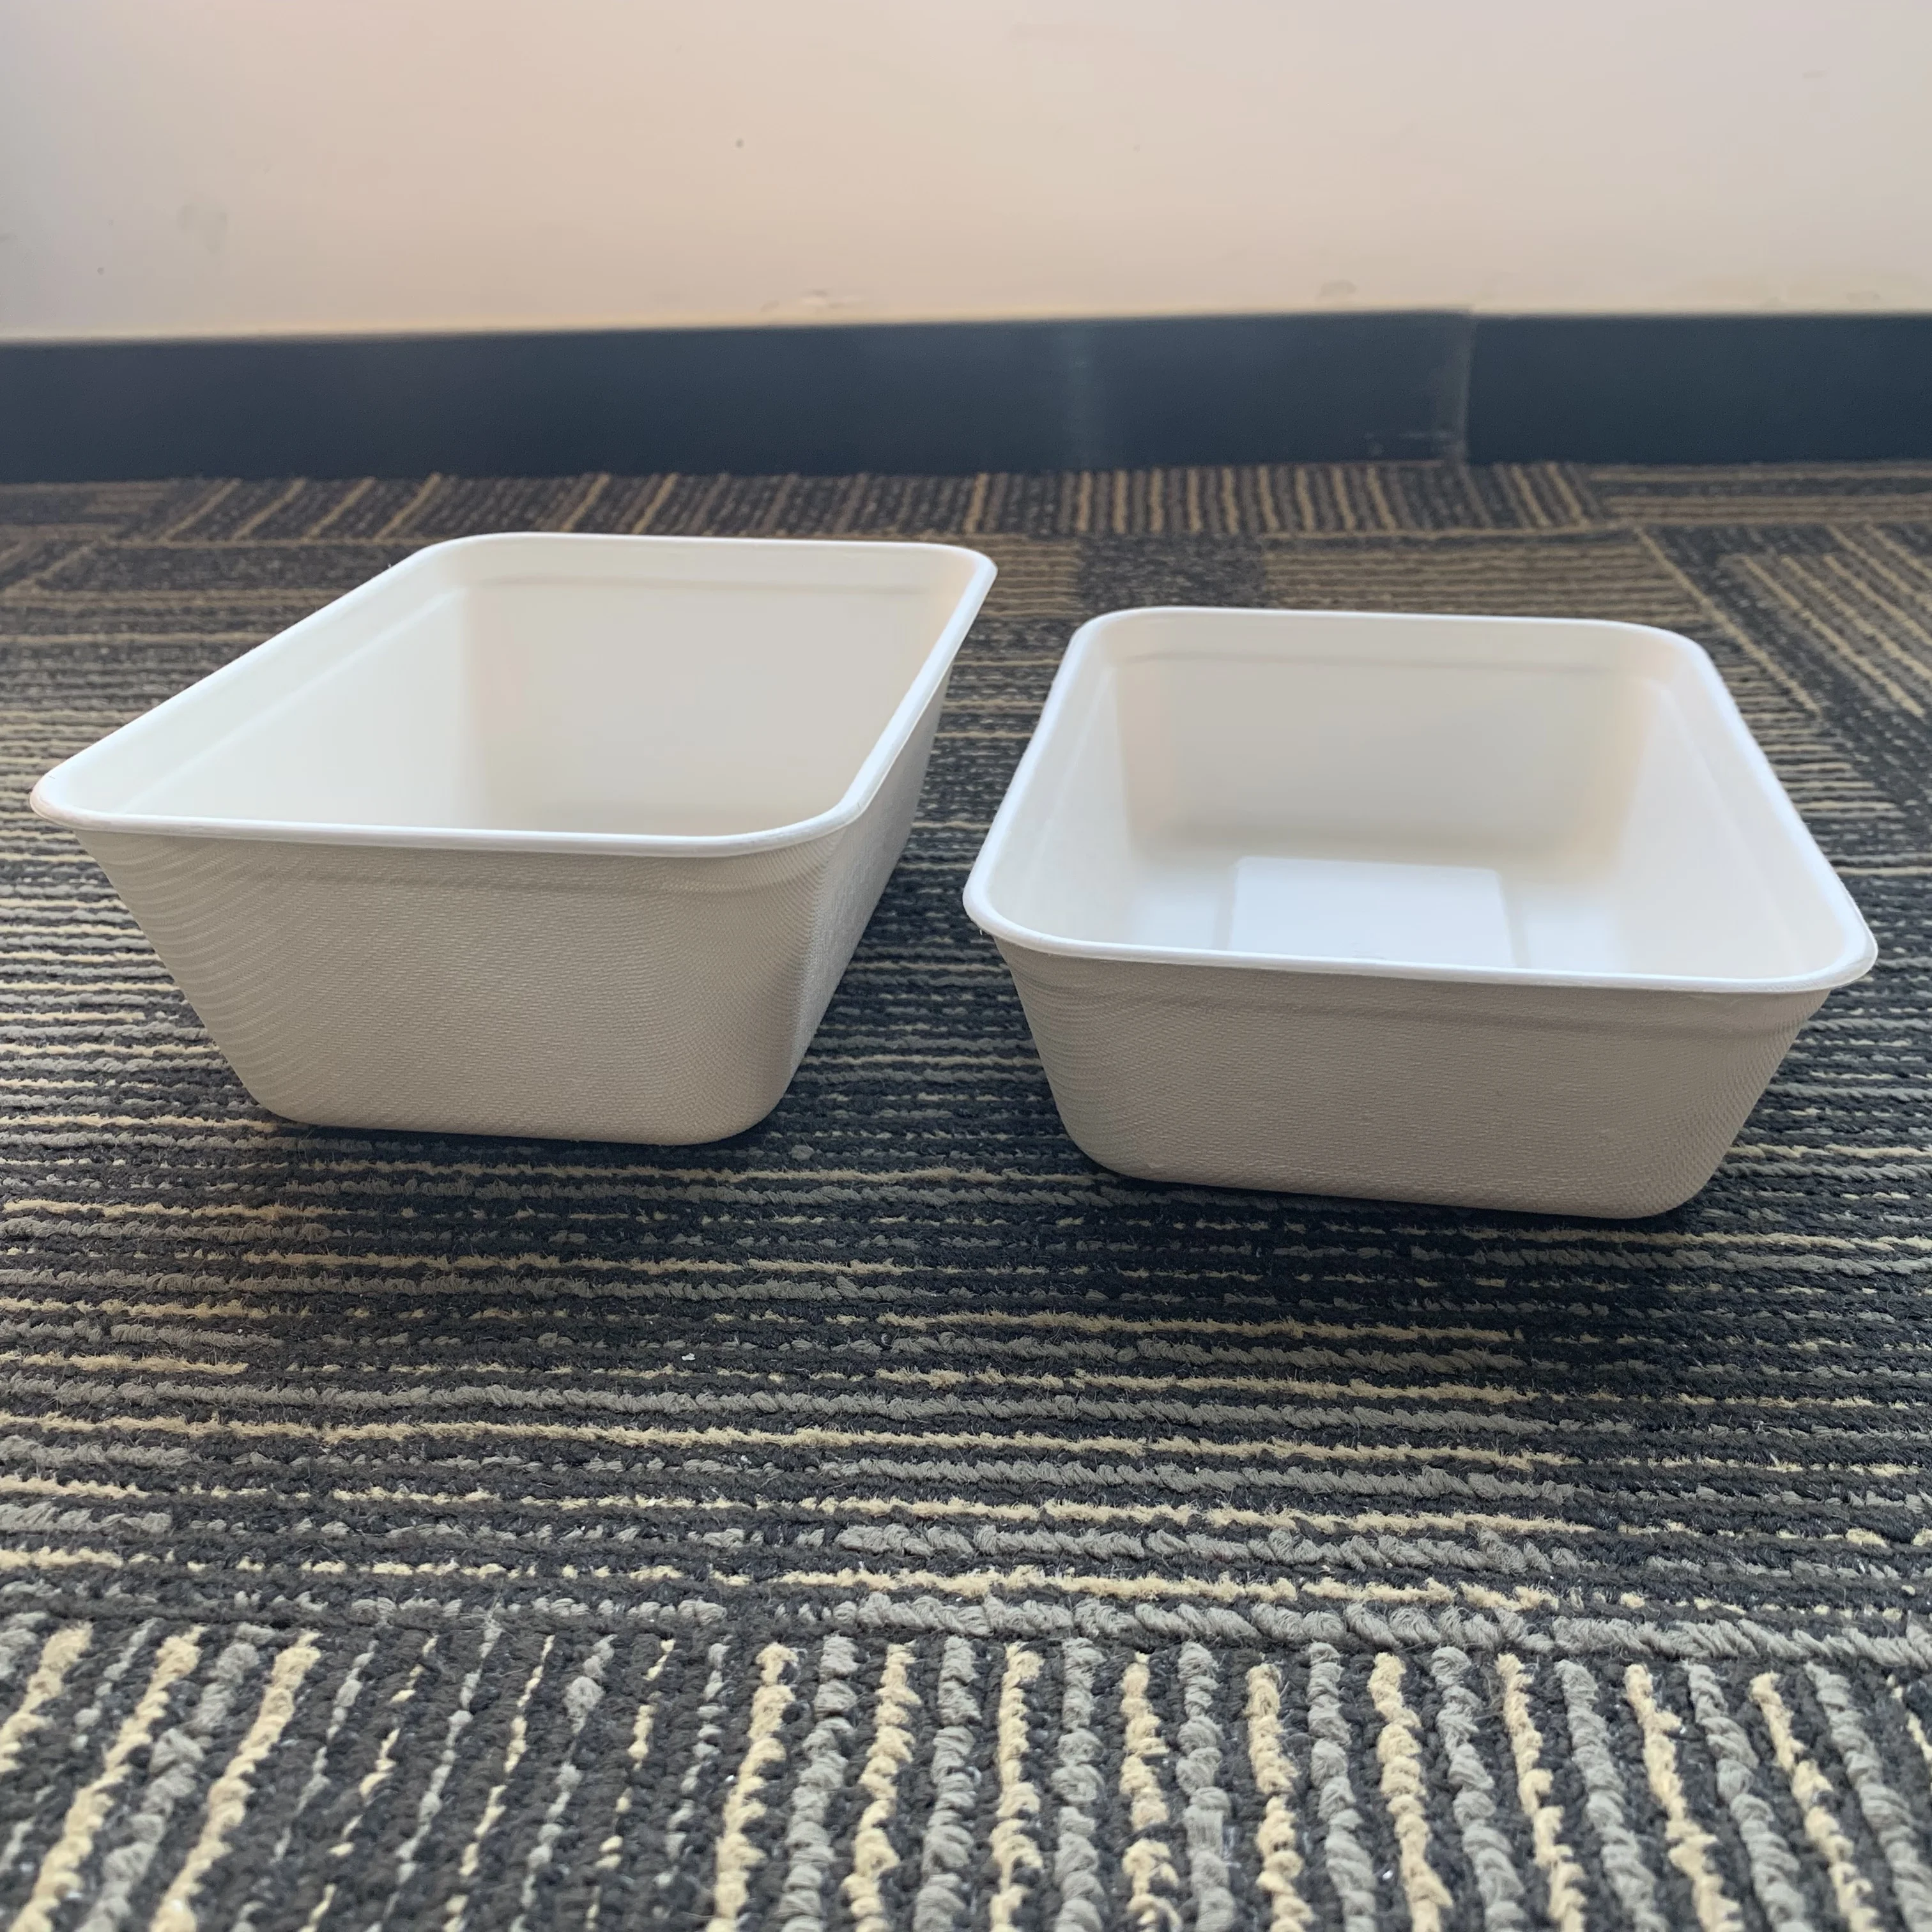 

China Food Packing Bamboo Bagasse Take Away Biodegradable Food Container, White or natural